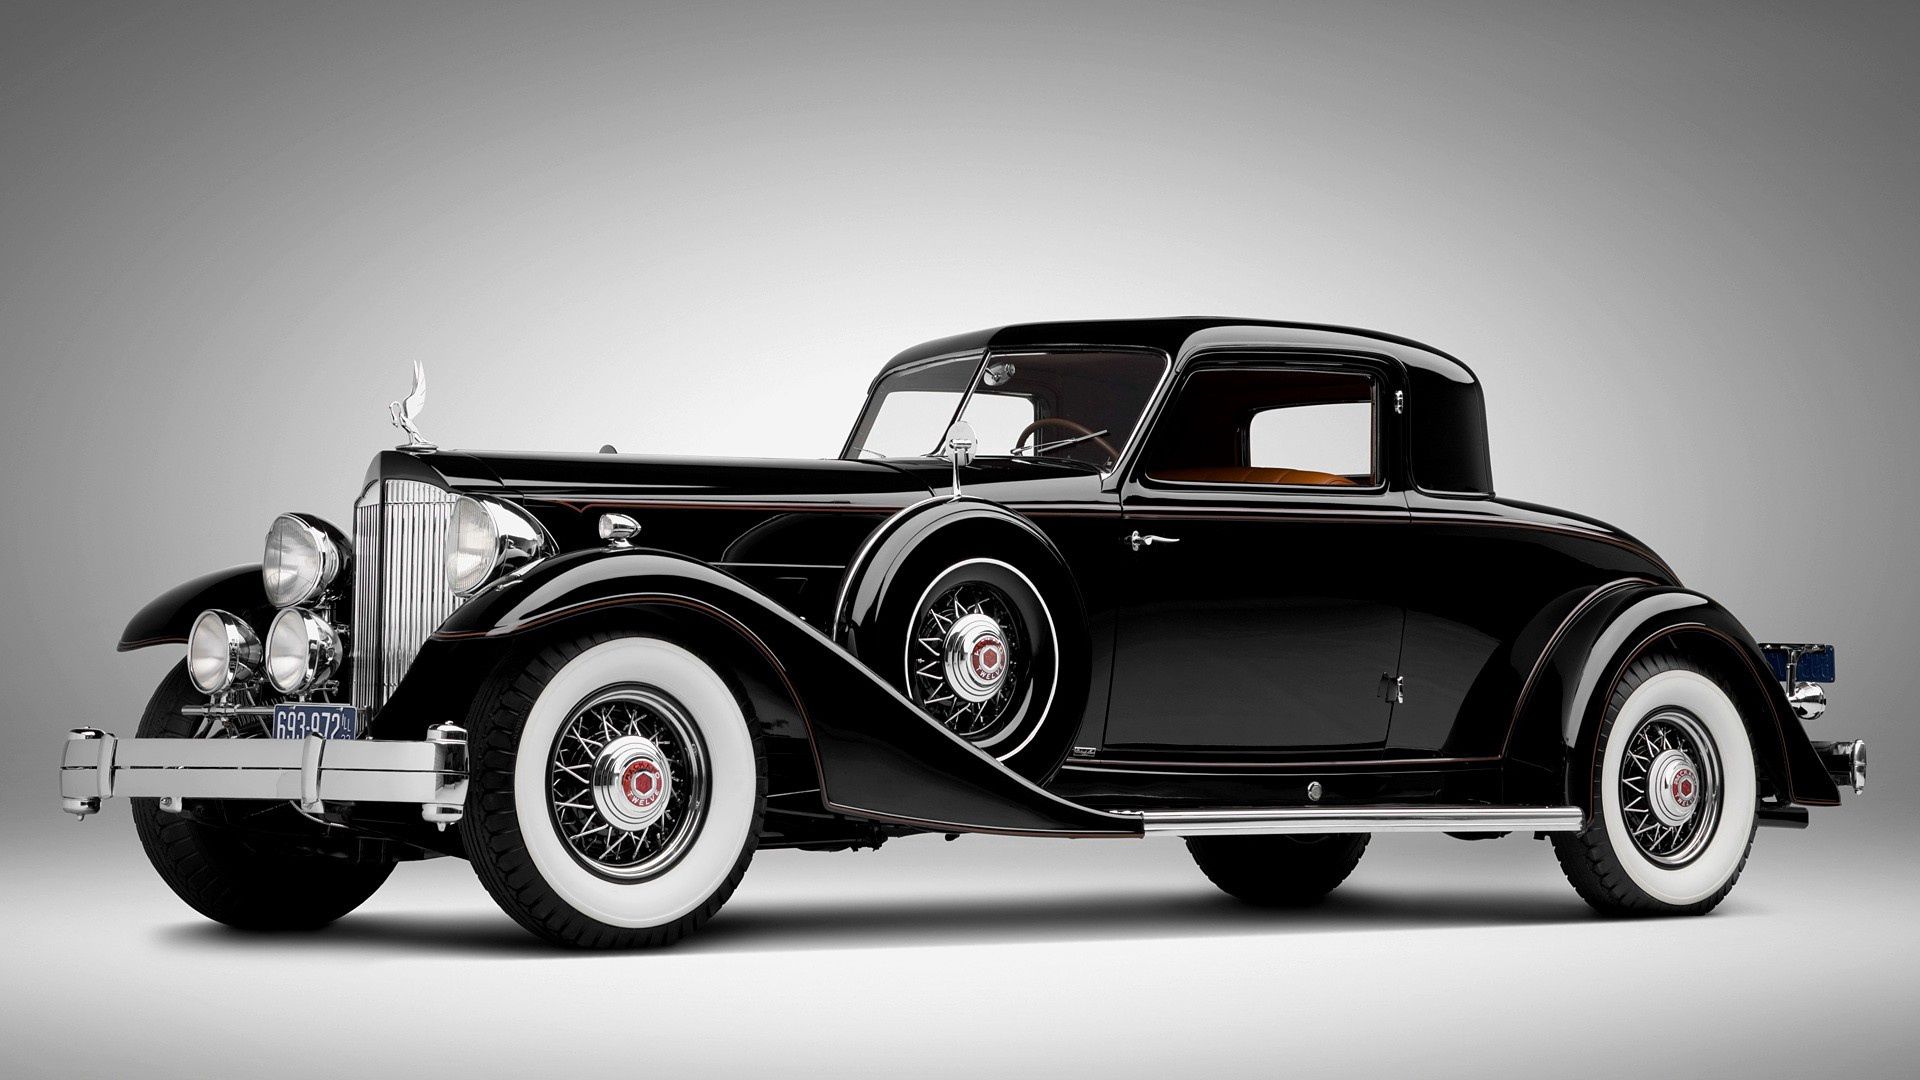 classic car, rolls royce, cars, side view, vintage car iphone wallpaper